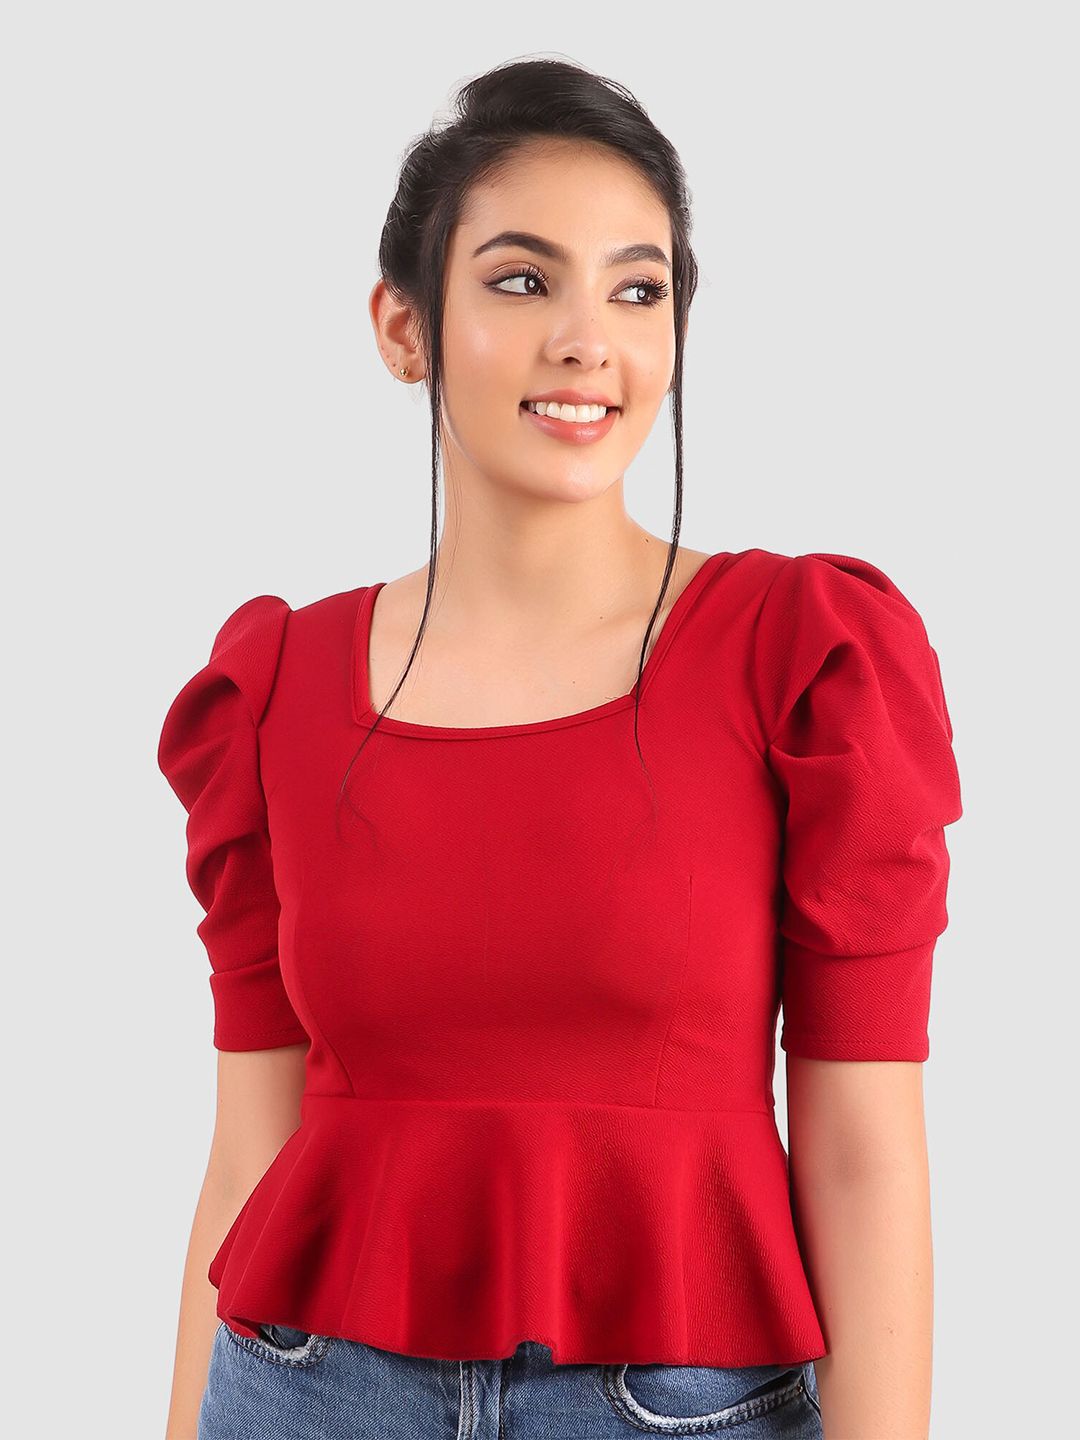 Womenster Red Crepe Peplum Top Price in India